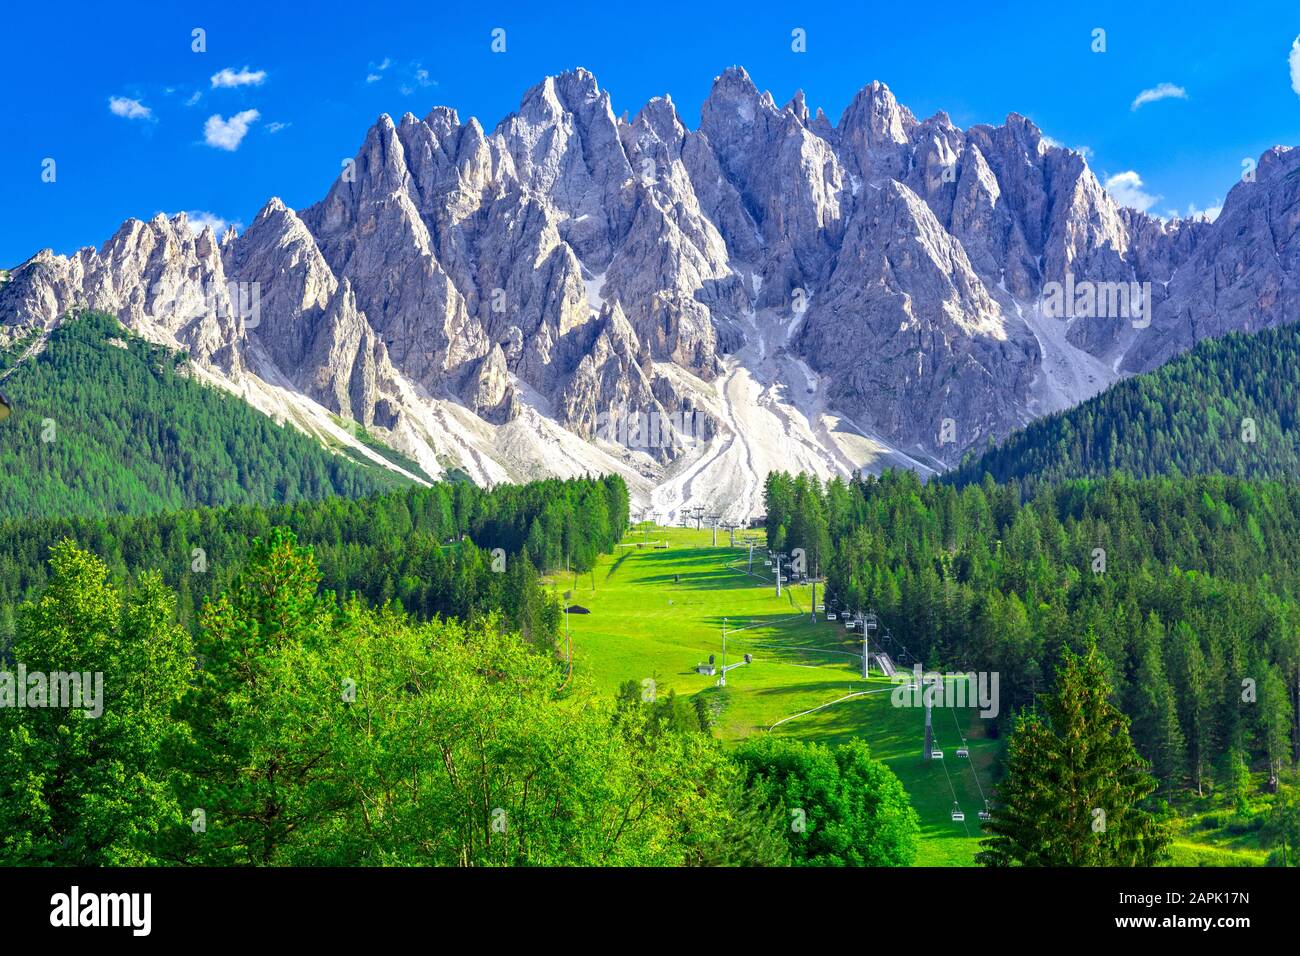 Summer landscape in Dolomites, ski slope with cable lift in San Candido with mountain range in background Stock Photo